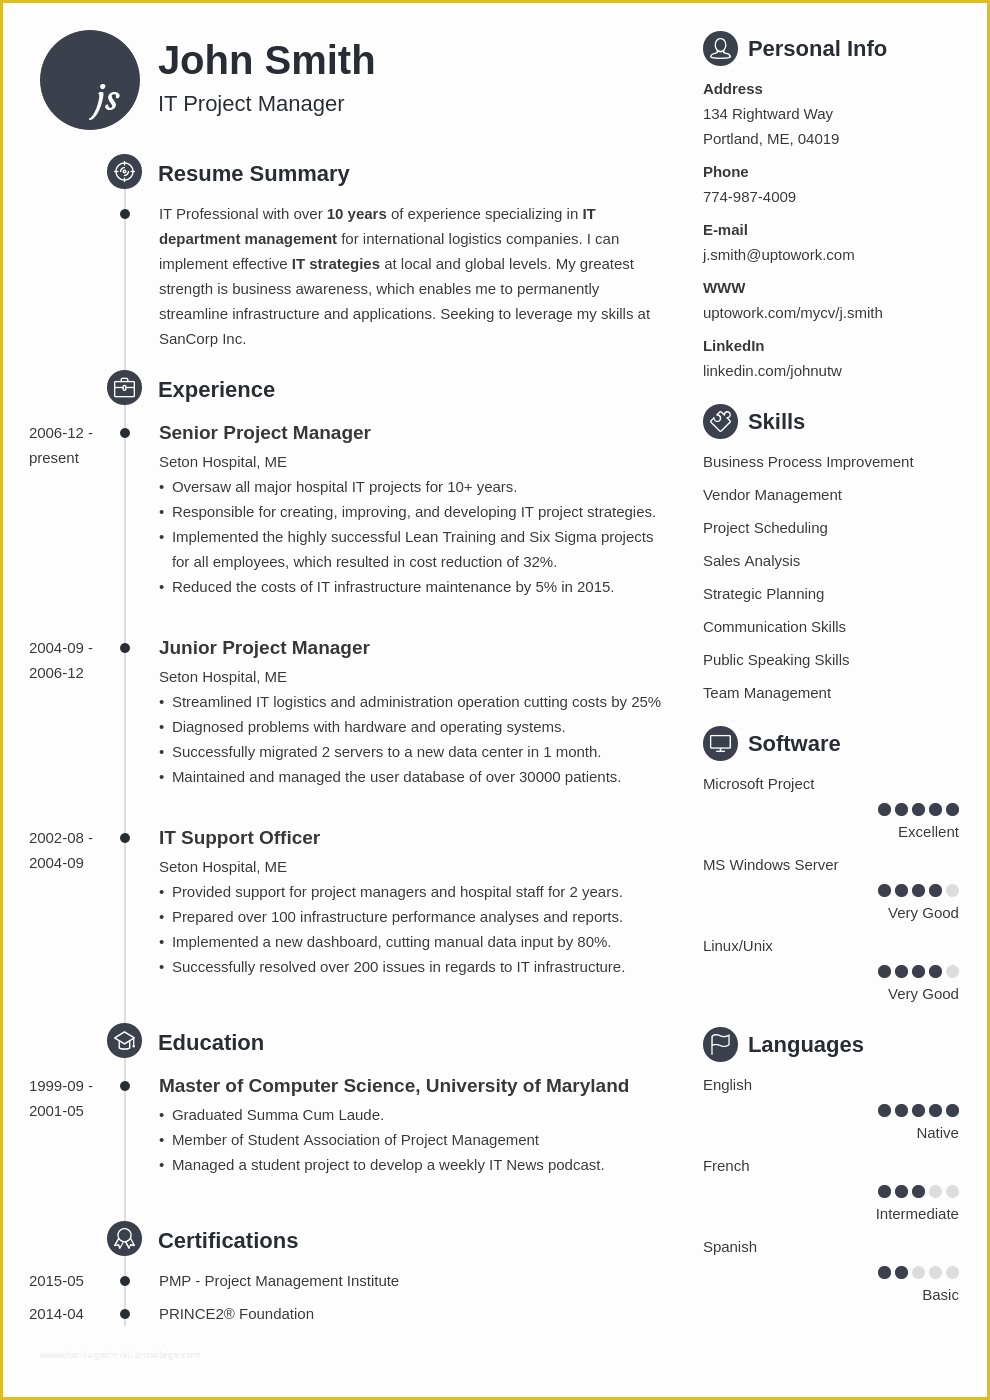 Personal Resume Template Free Of 20 Resume Templates [download] Create Your Resume In 5